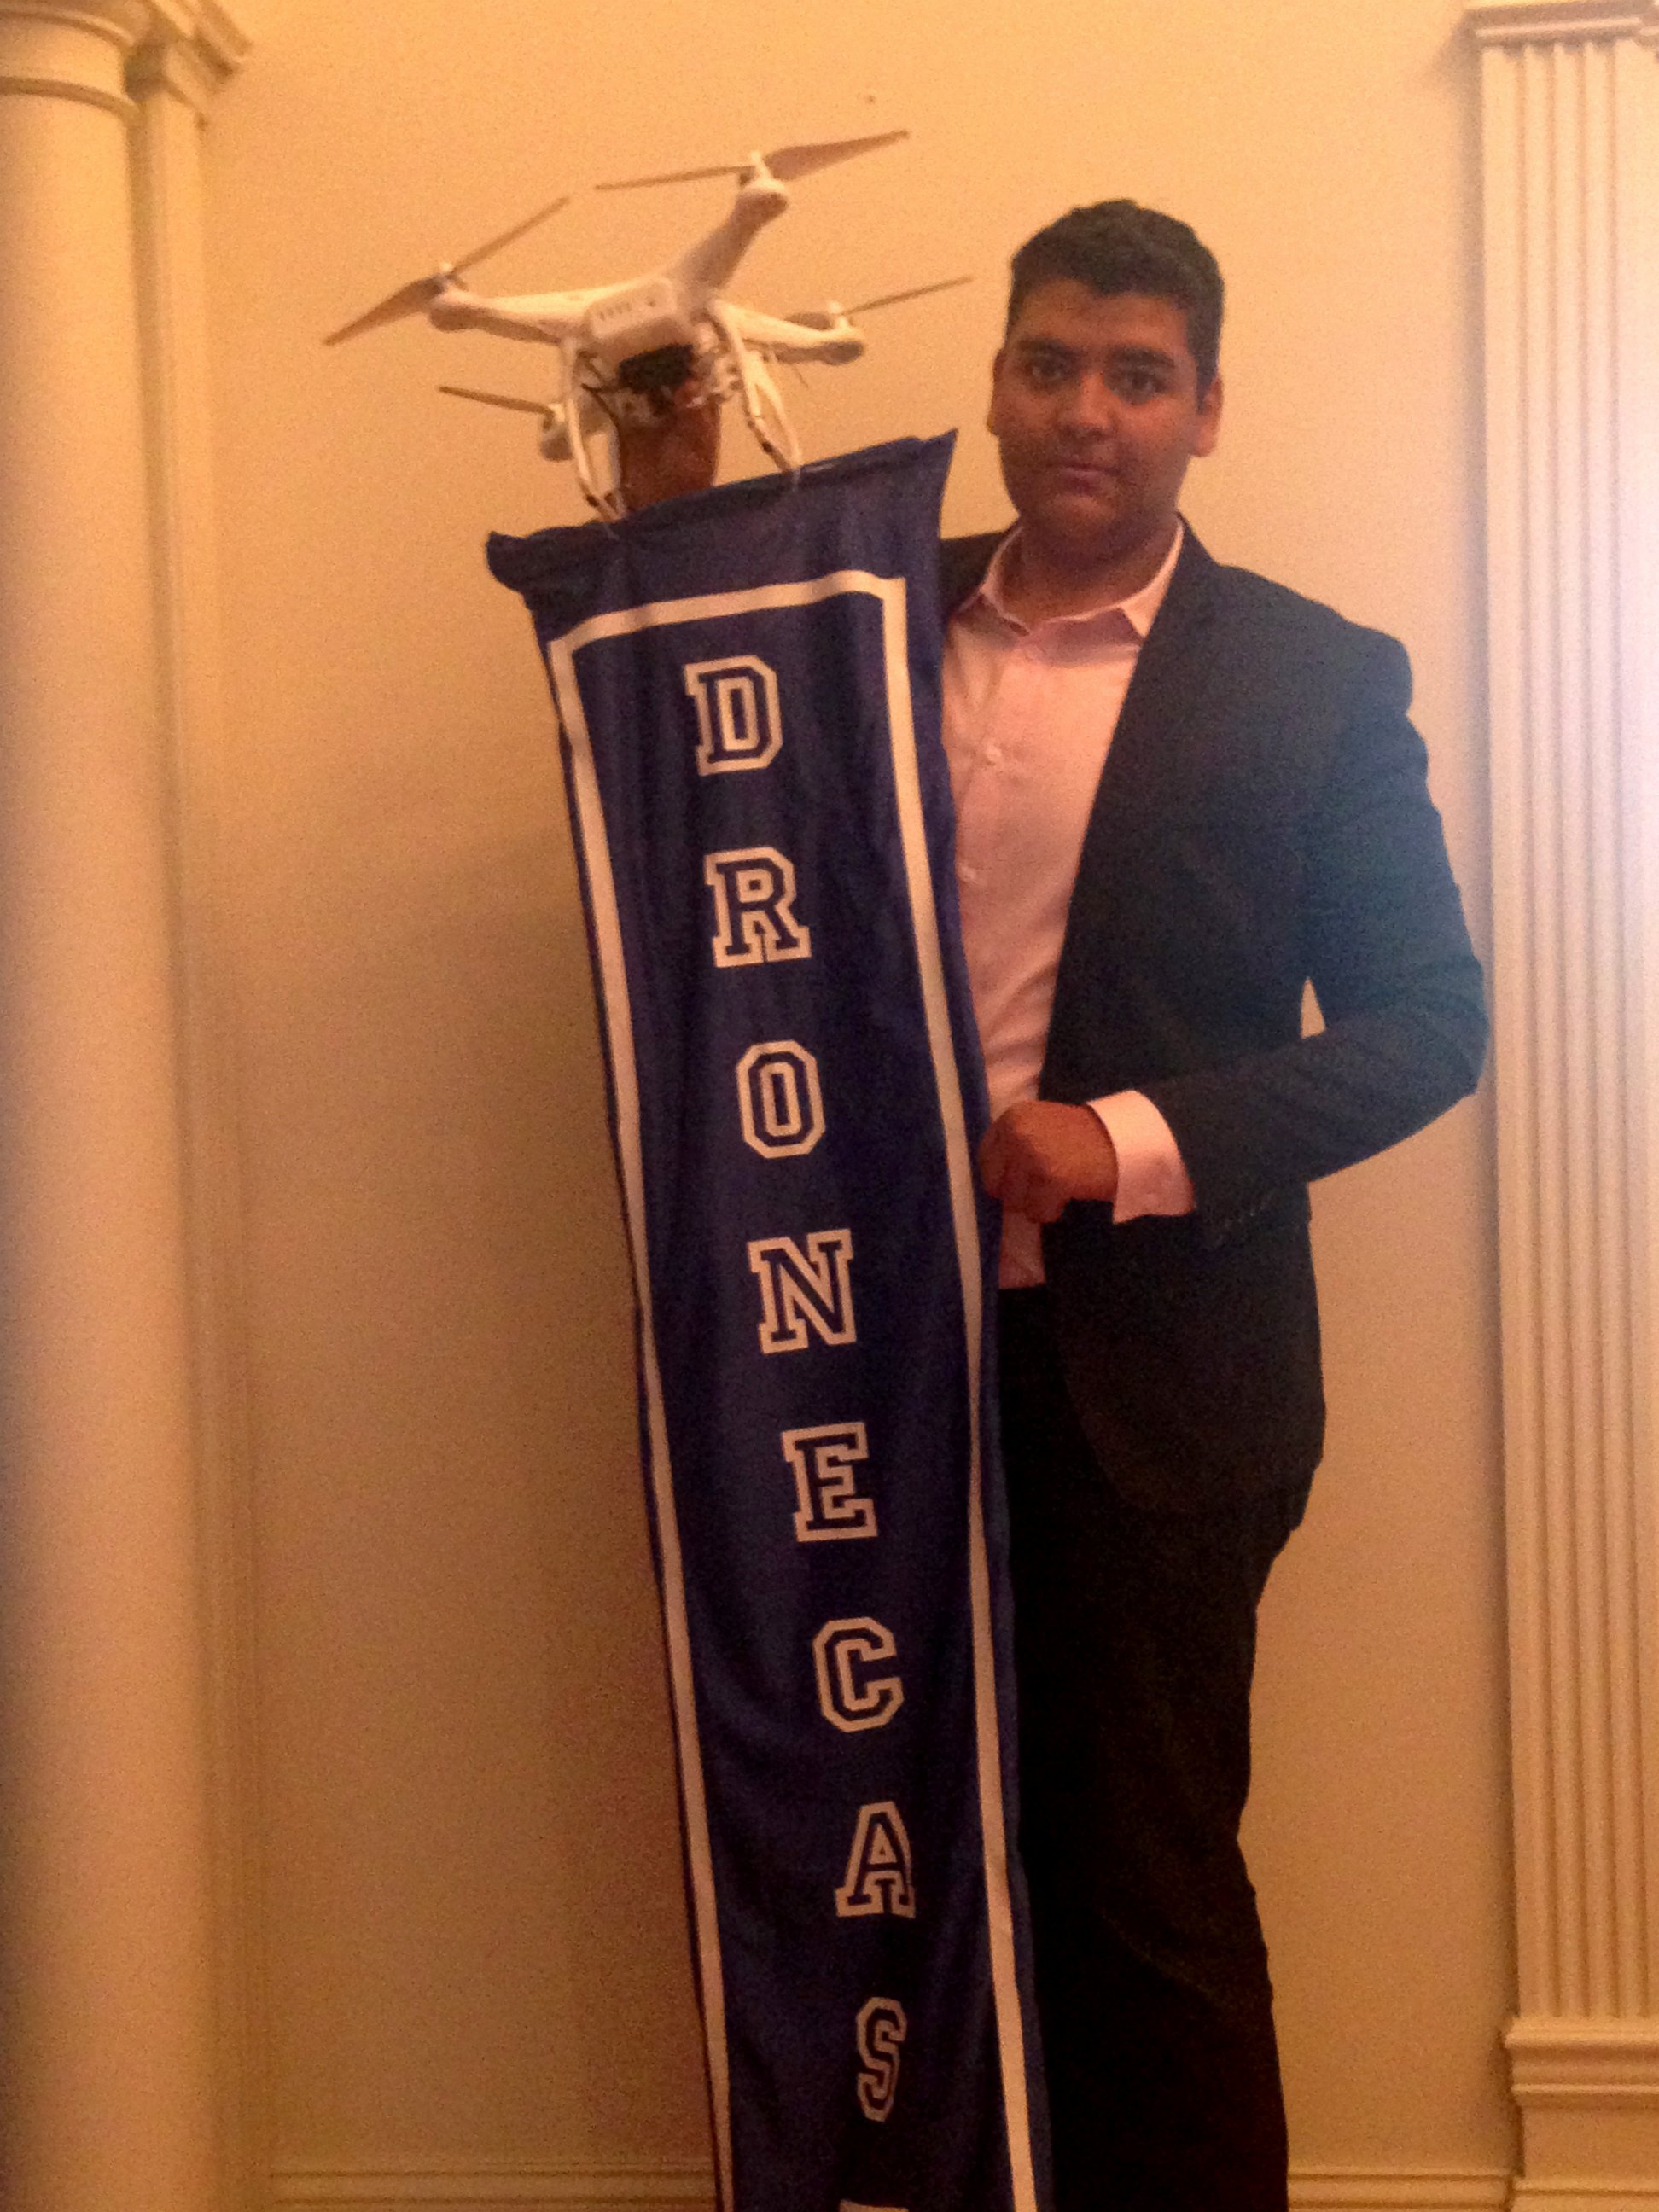 PHOTO: GauravJit Singh, the 19-year-old founder and CEO of DroneCast.